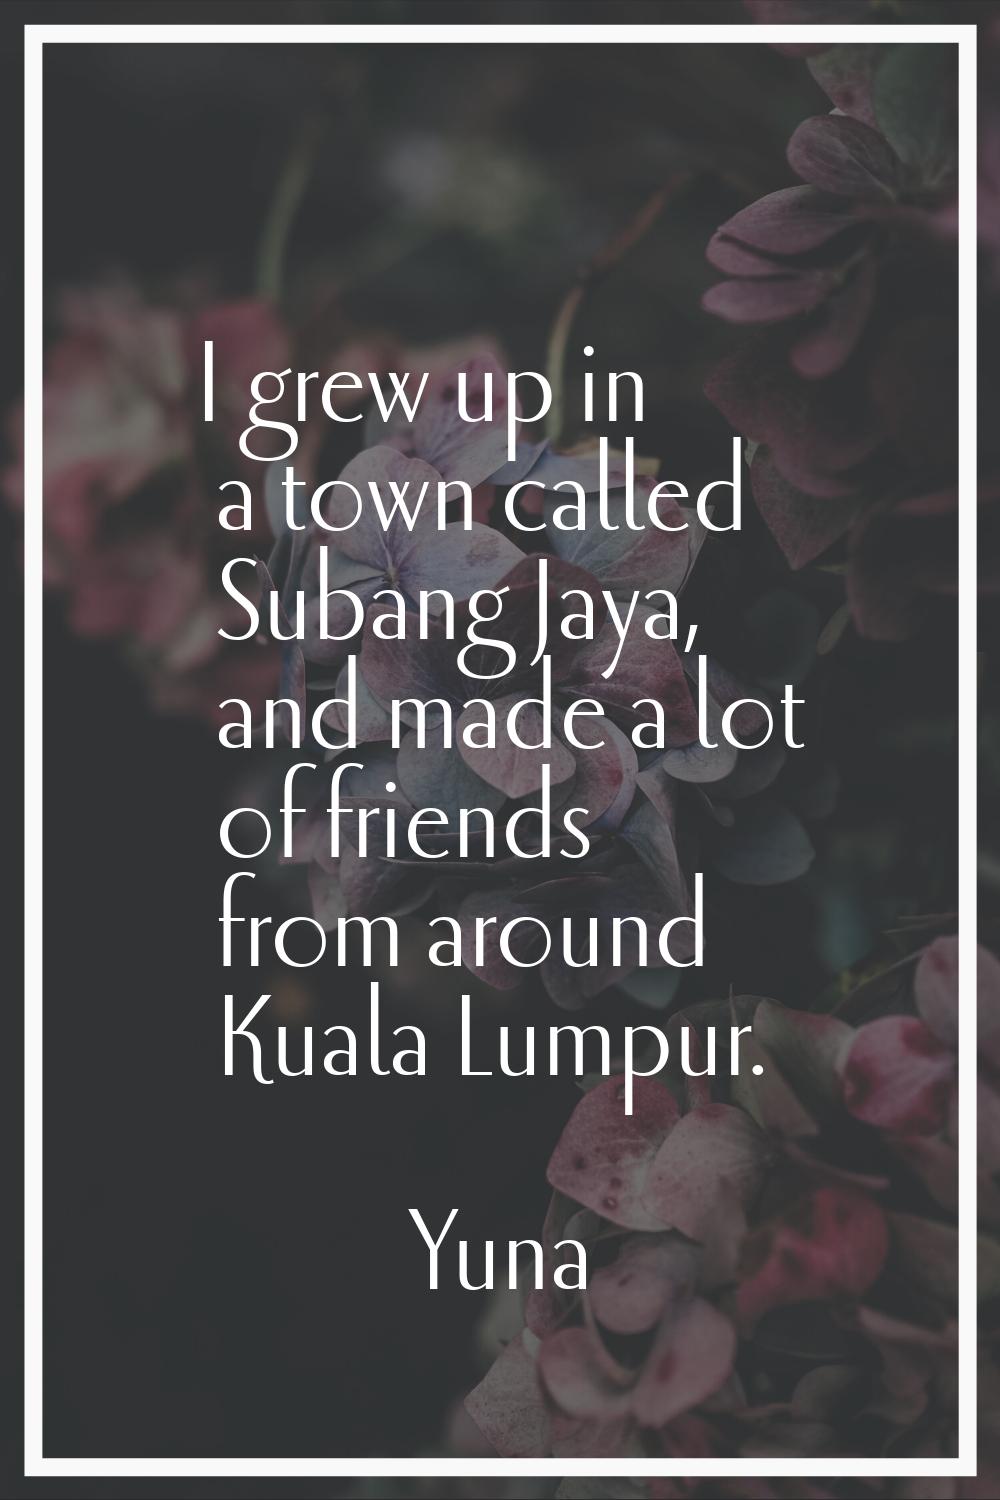 I grew up in a town called Subang Jaya, and made a lot of friends from around Kuala Lumpur.